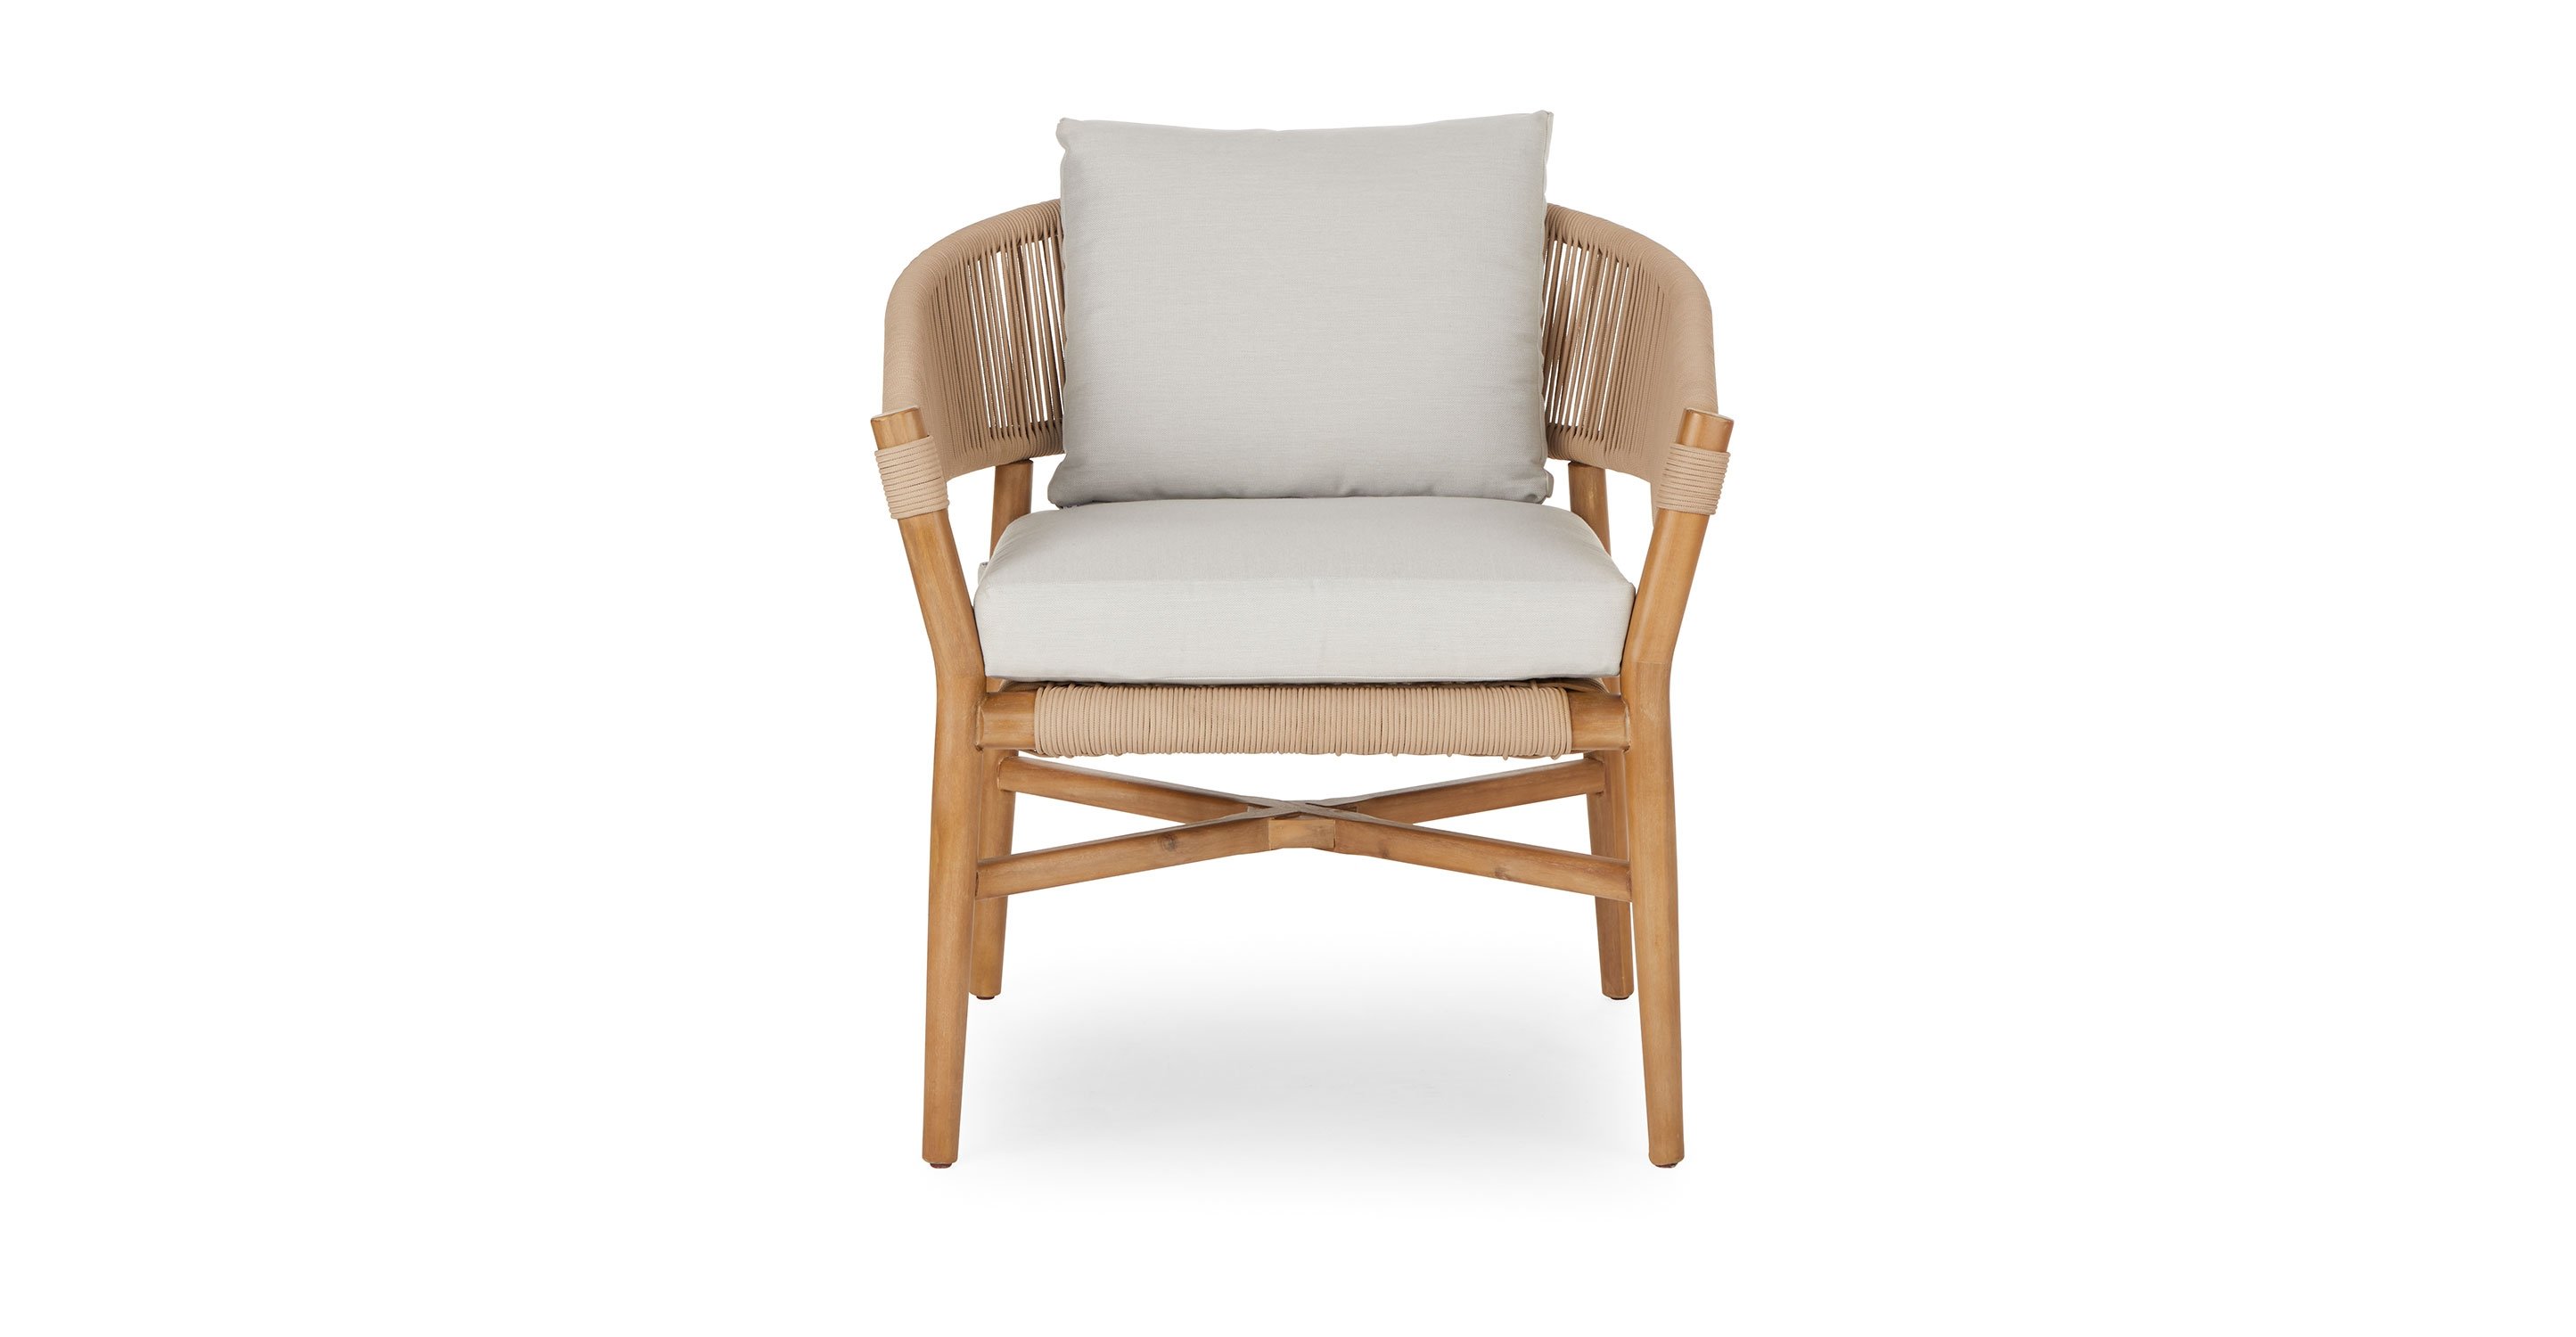 Makali Lounge Chair, Lily White - Image 2